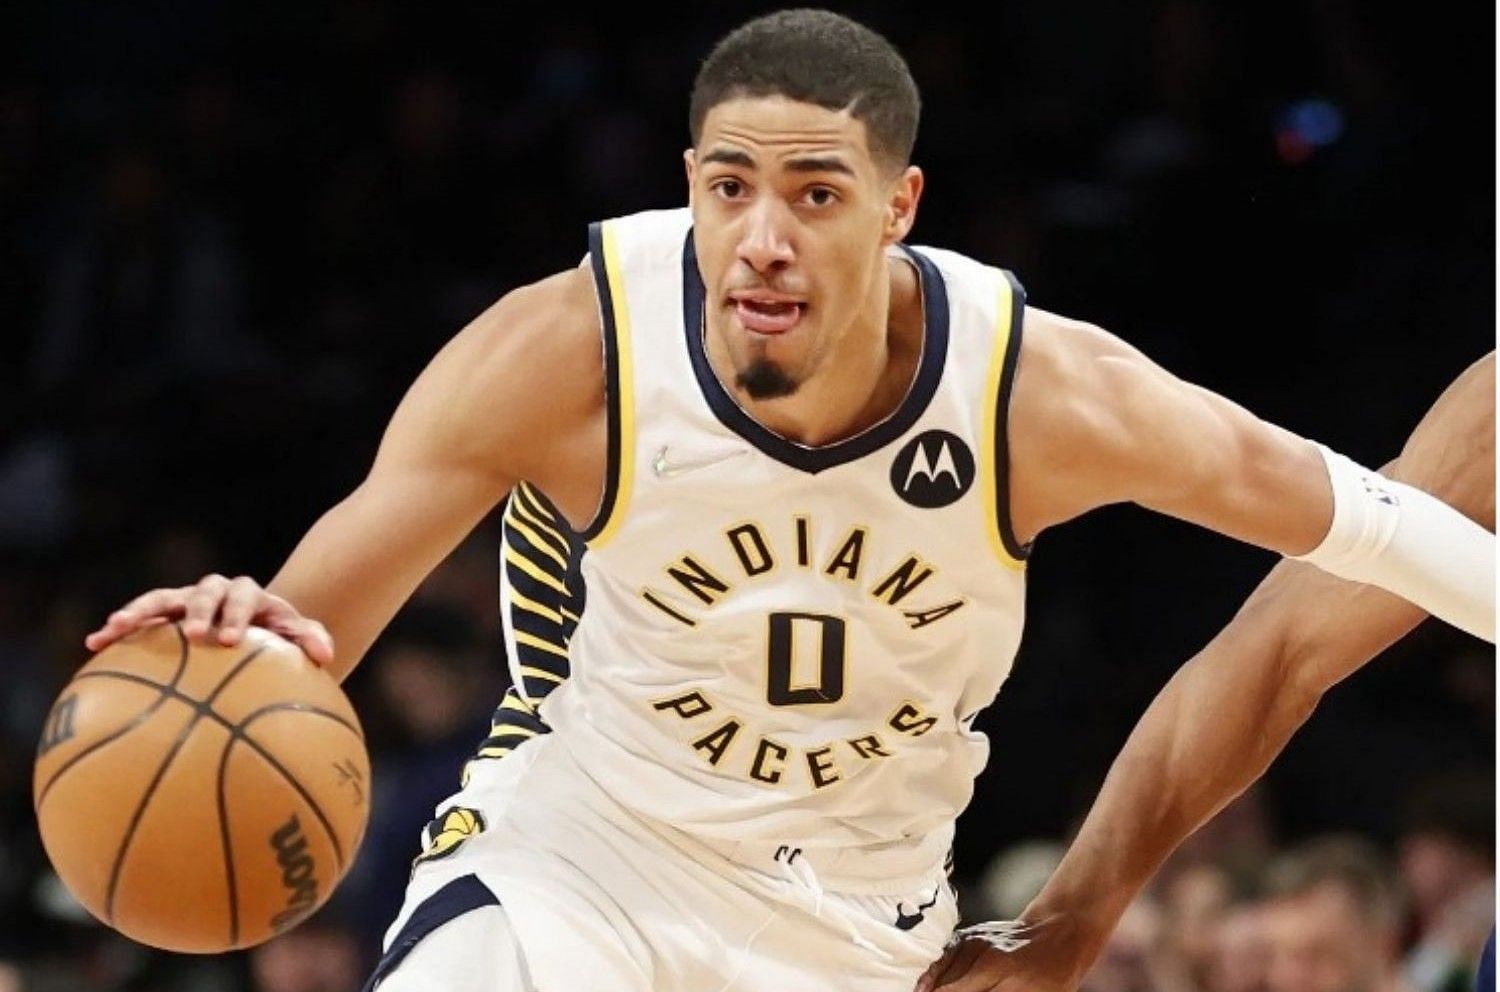 Tyrese Haliburton and the Indiana Pacers were looking to shock the world by beating the LA Lakers in the finals of the NBA In-Season Tournament on Saturday.